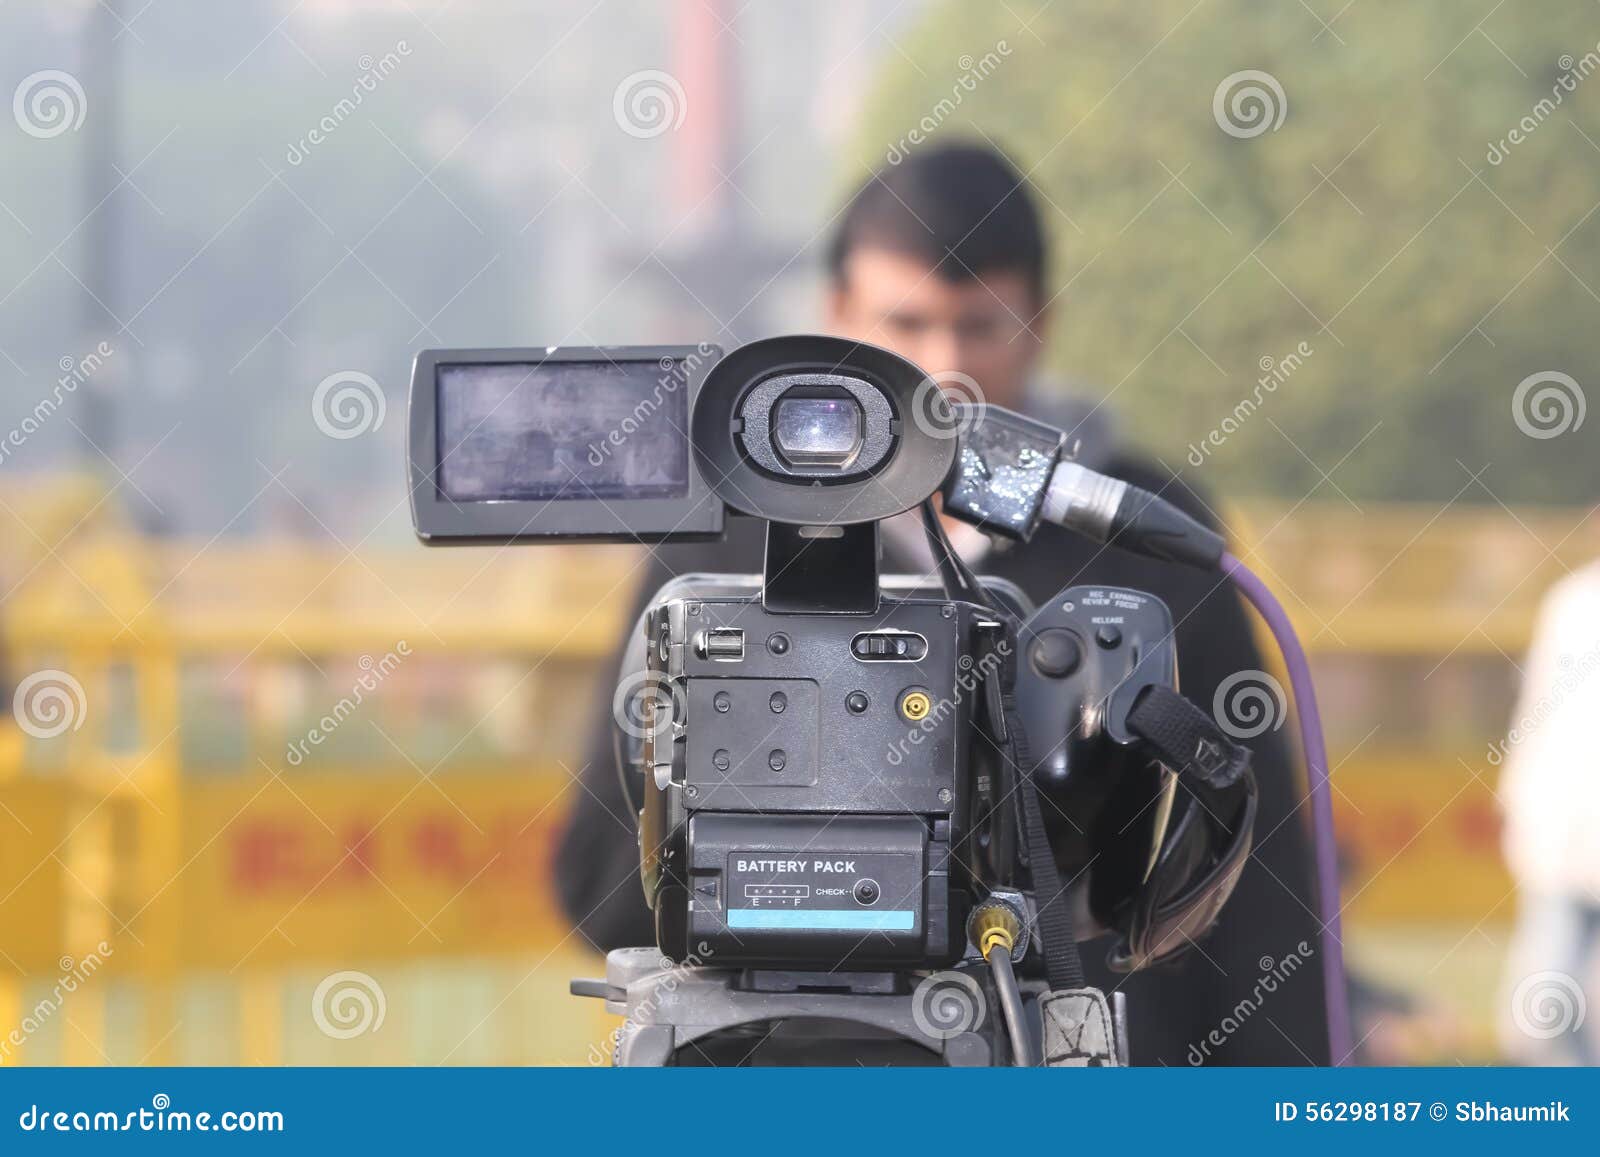 Journalist in front camera stock image. Image of photographic - 56298187